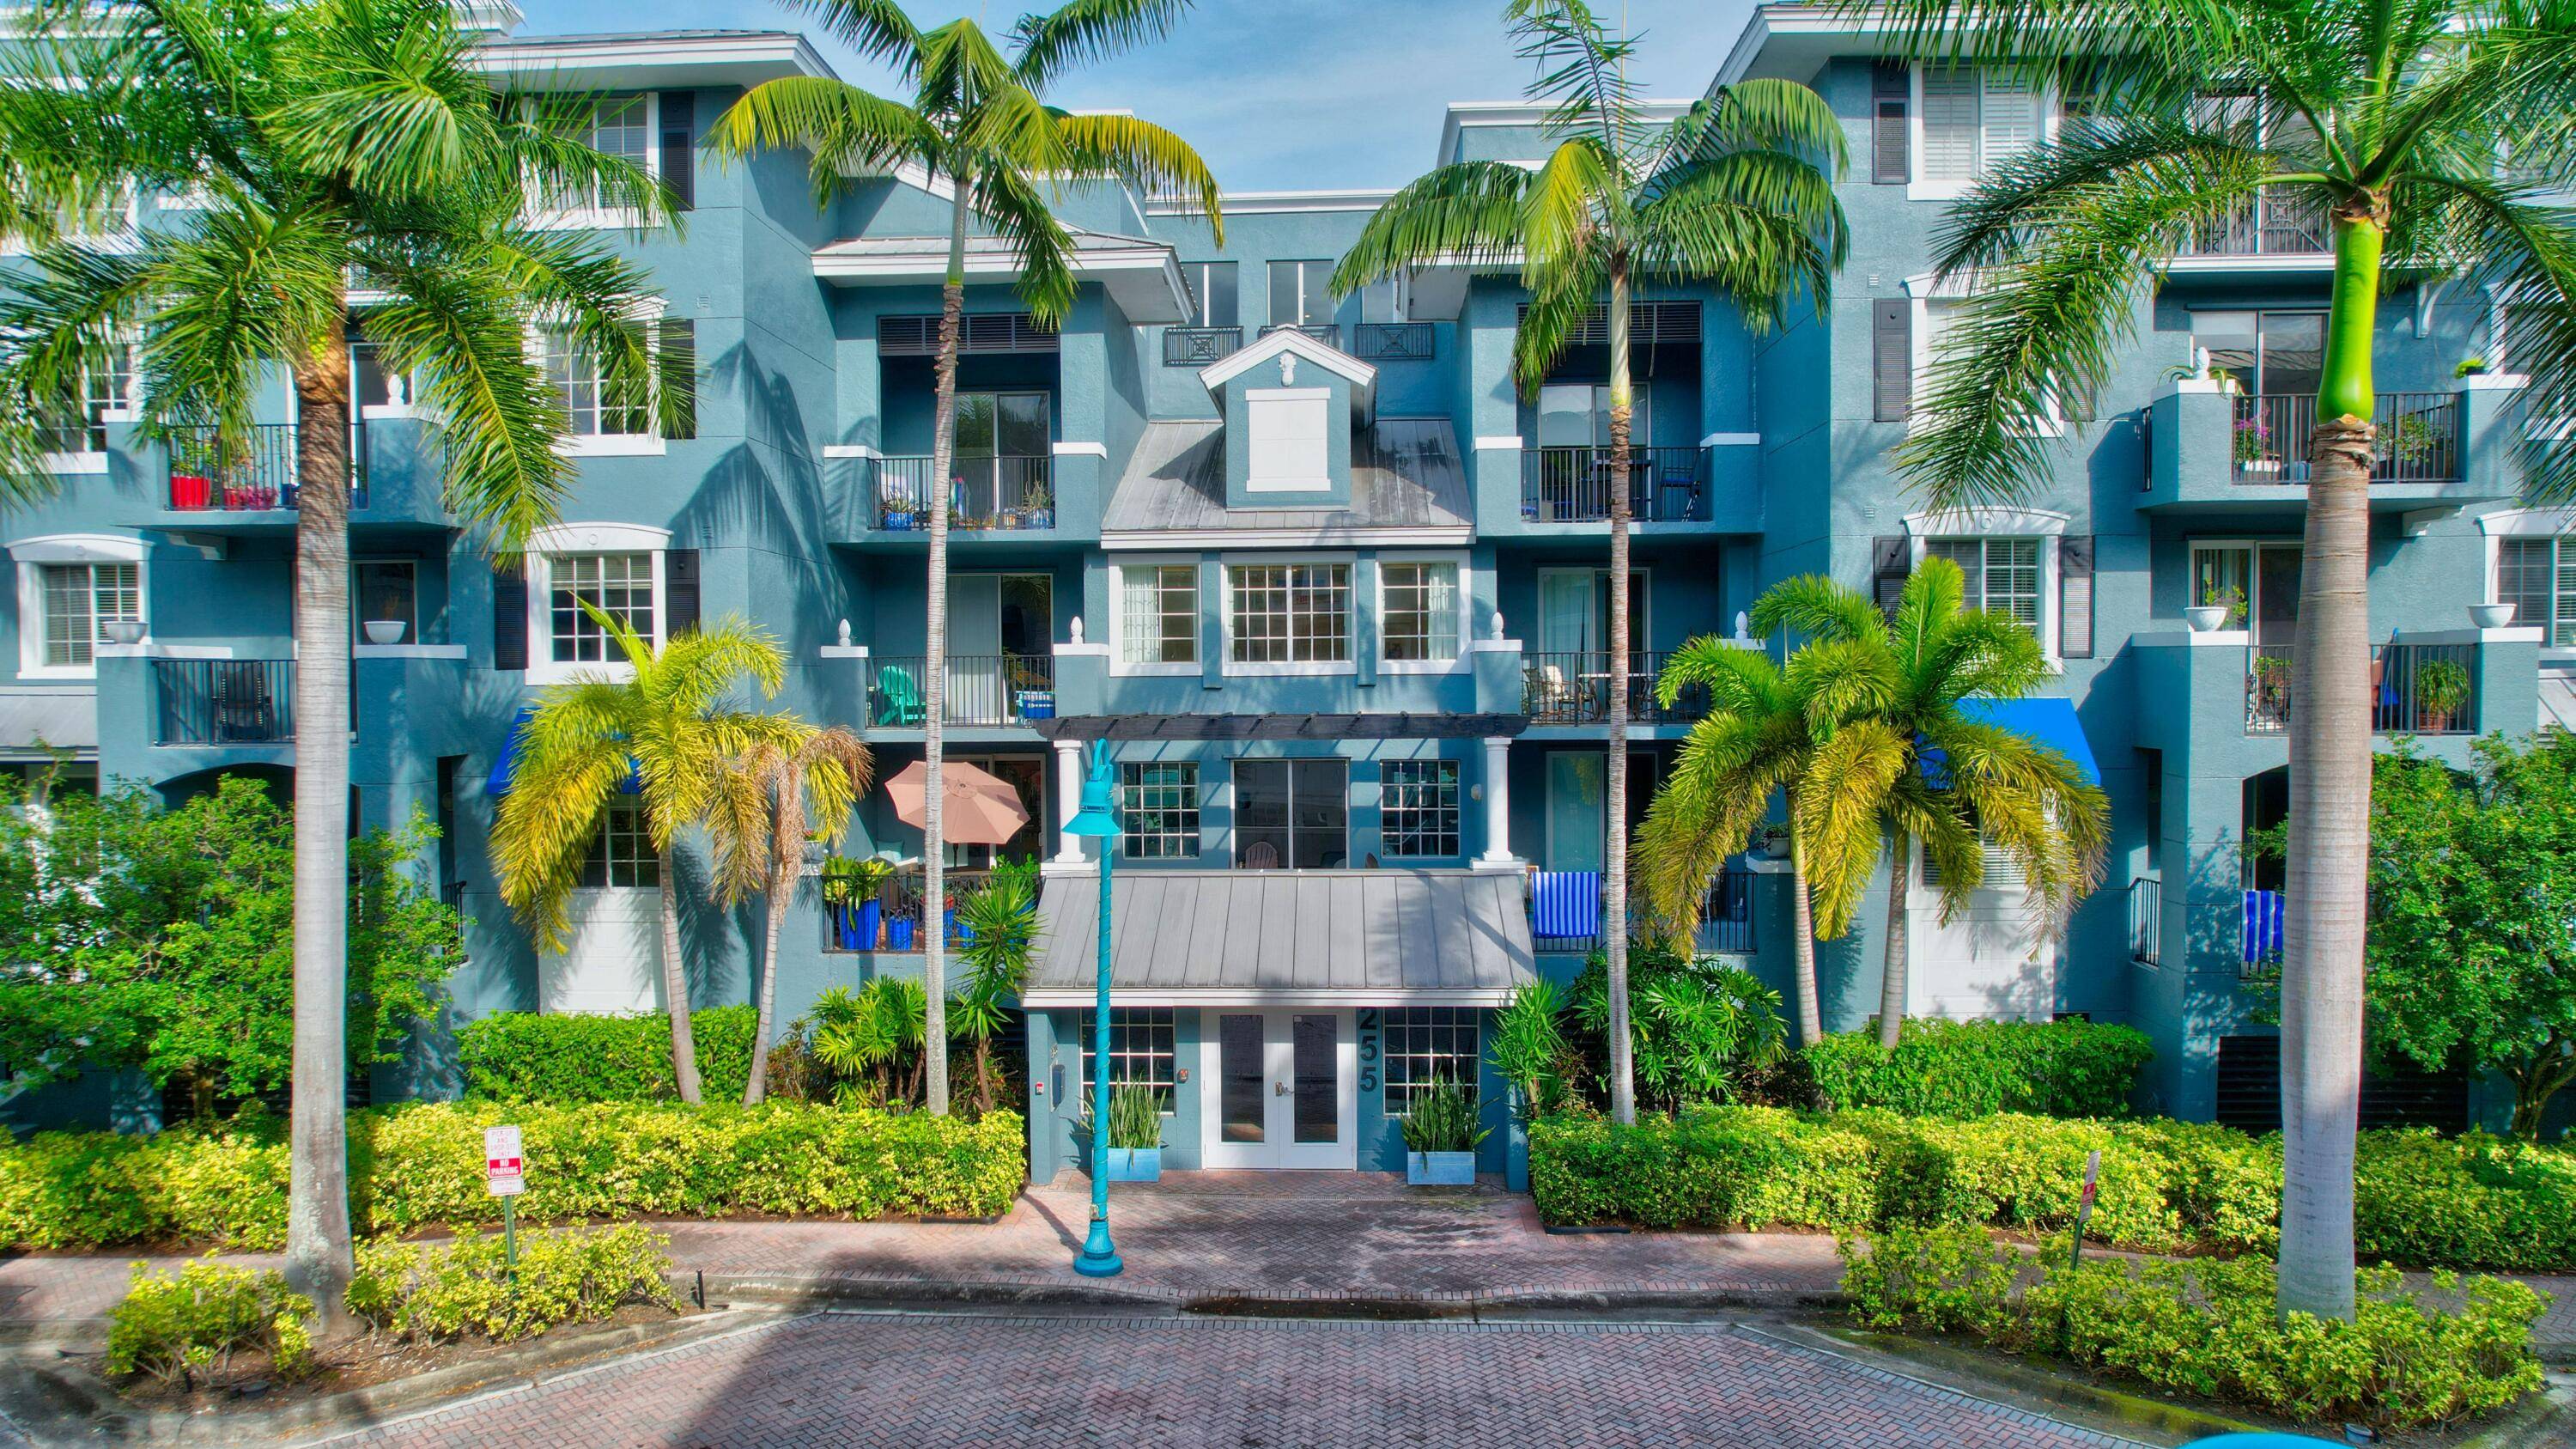 Beautifully furnished 2 2 condo in the heart of Downtown Delray Beach's famous Pineapple Grove !